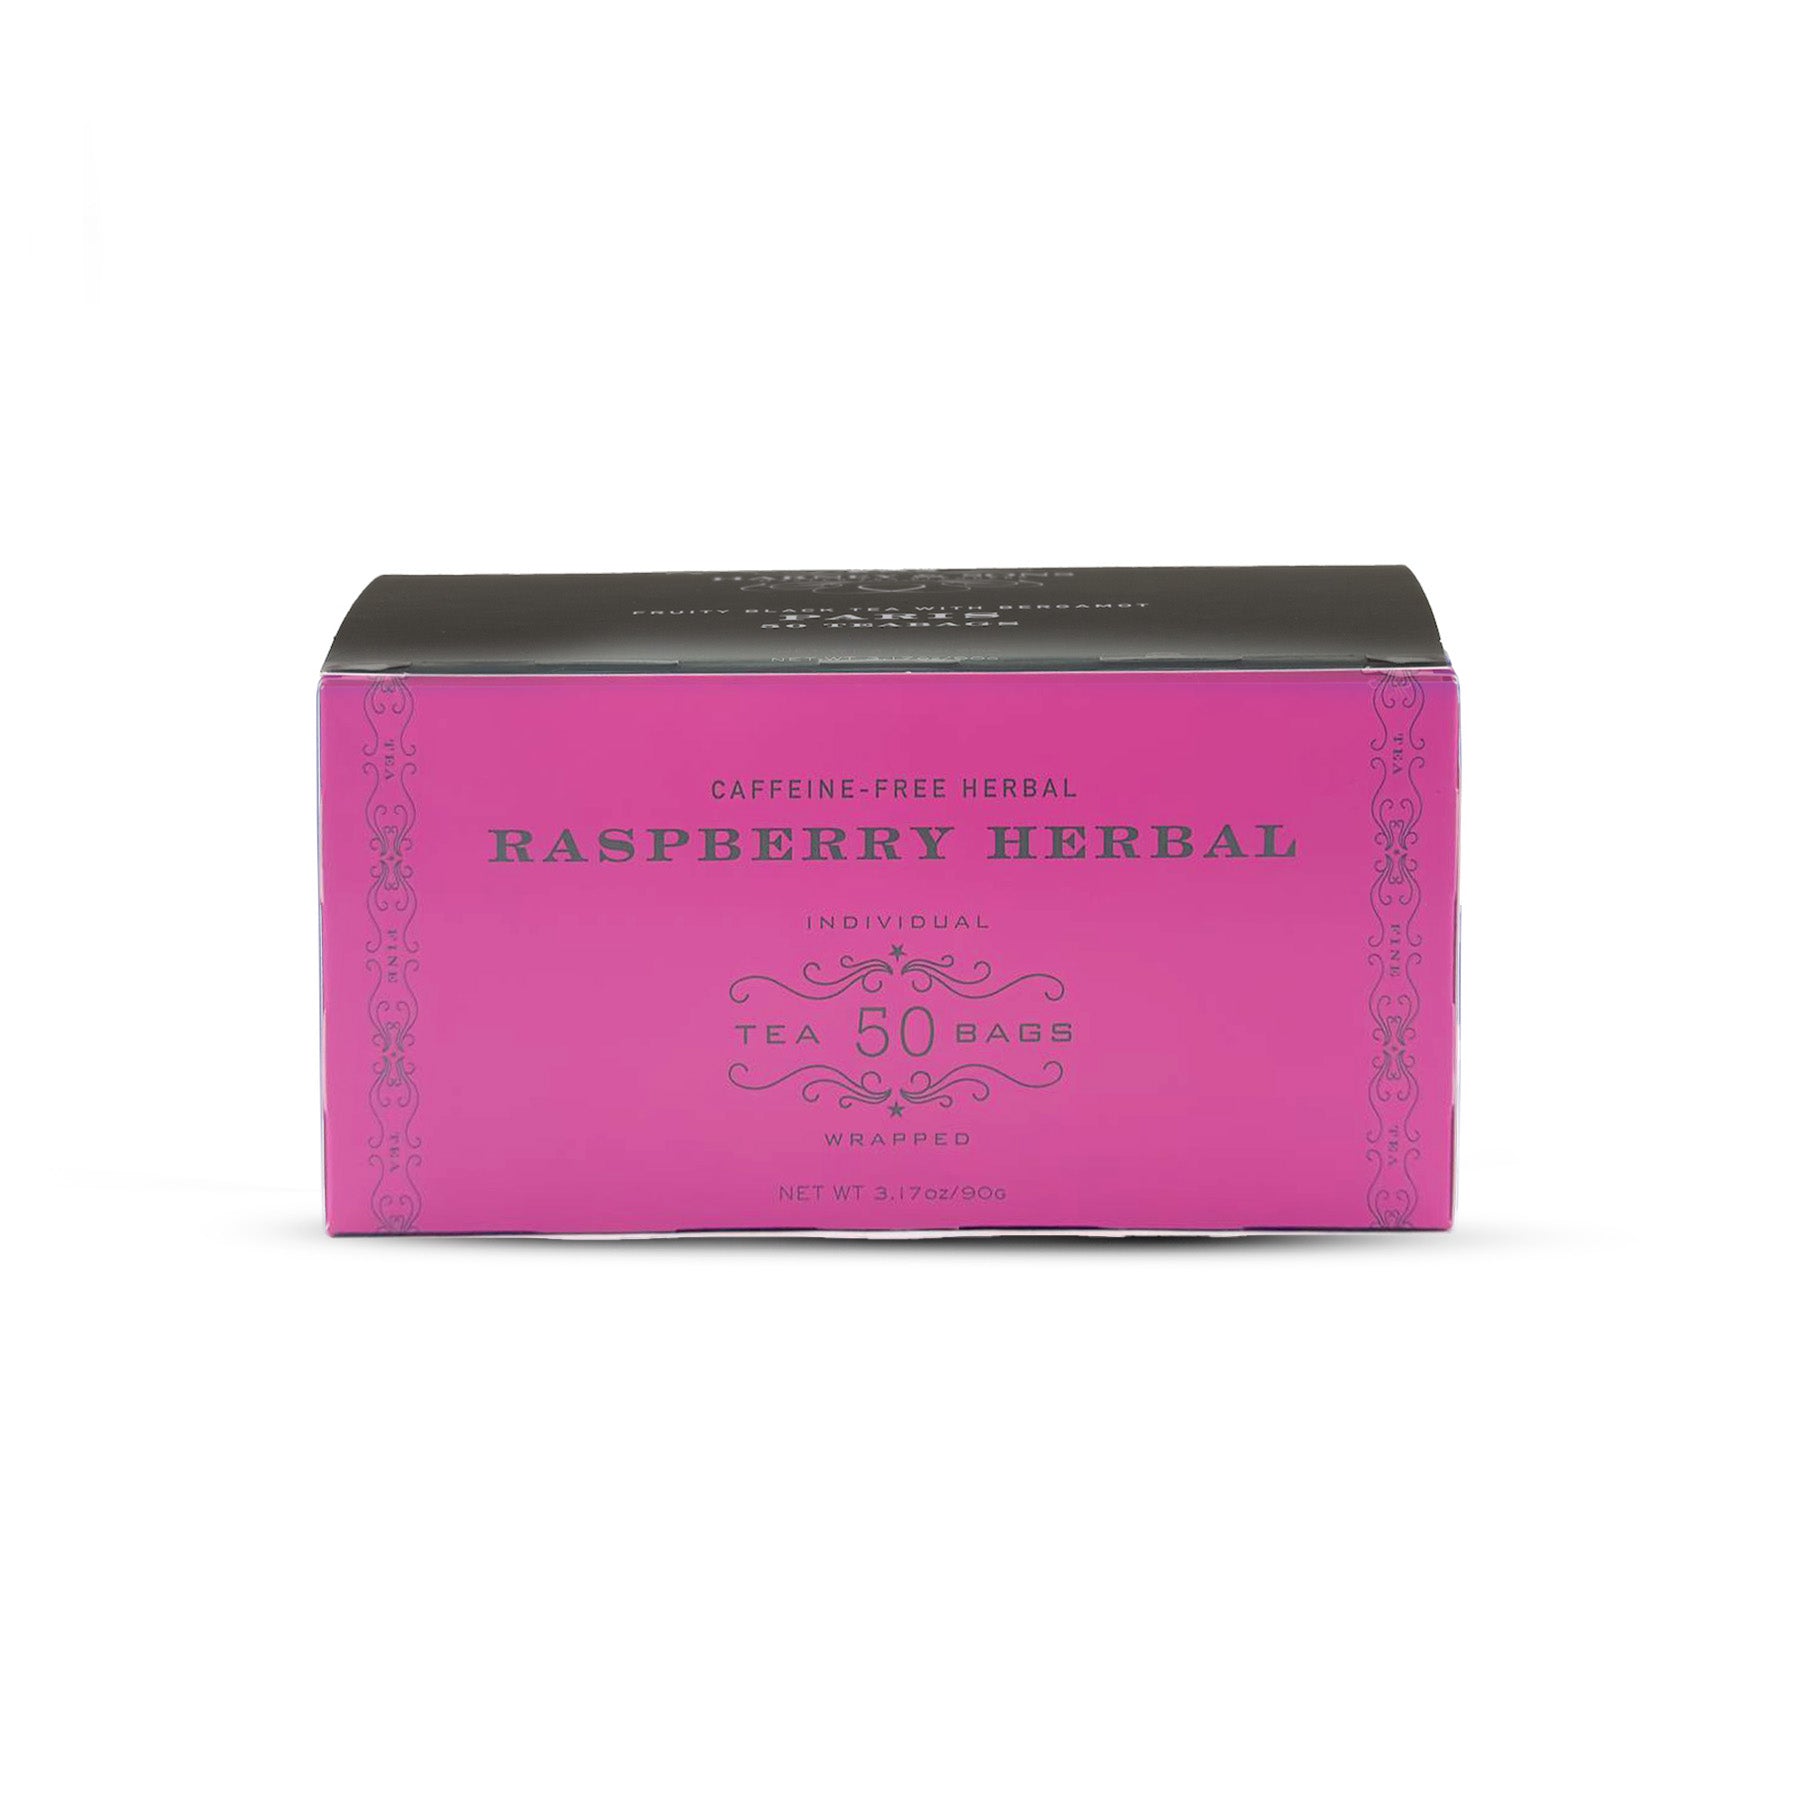 Raspberry Herbal, Box of 50 Foil Wrapped Teabags - Harney & Sons Fine Teas Europe